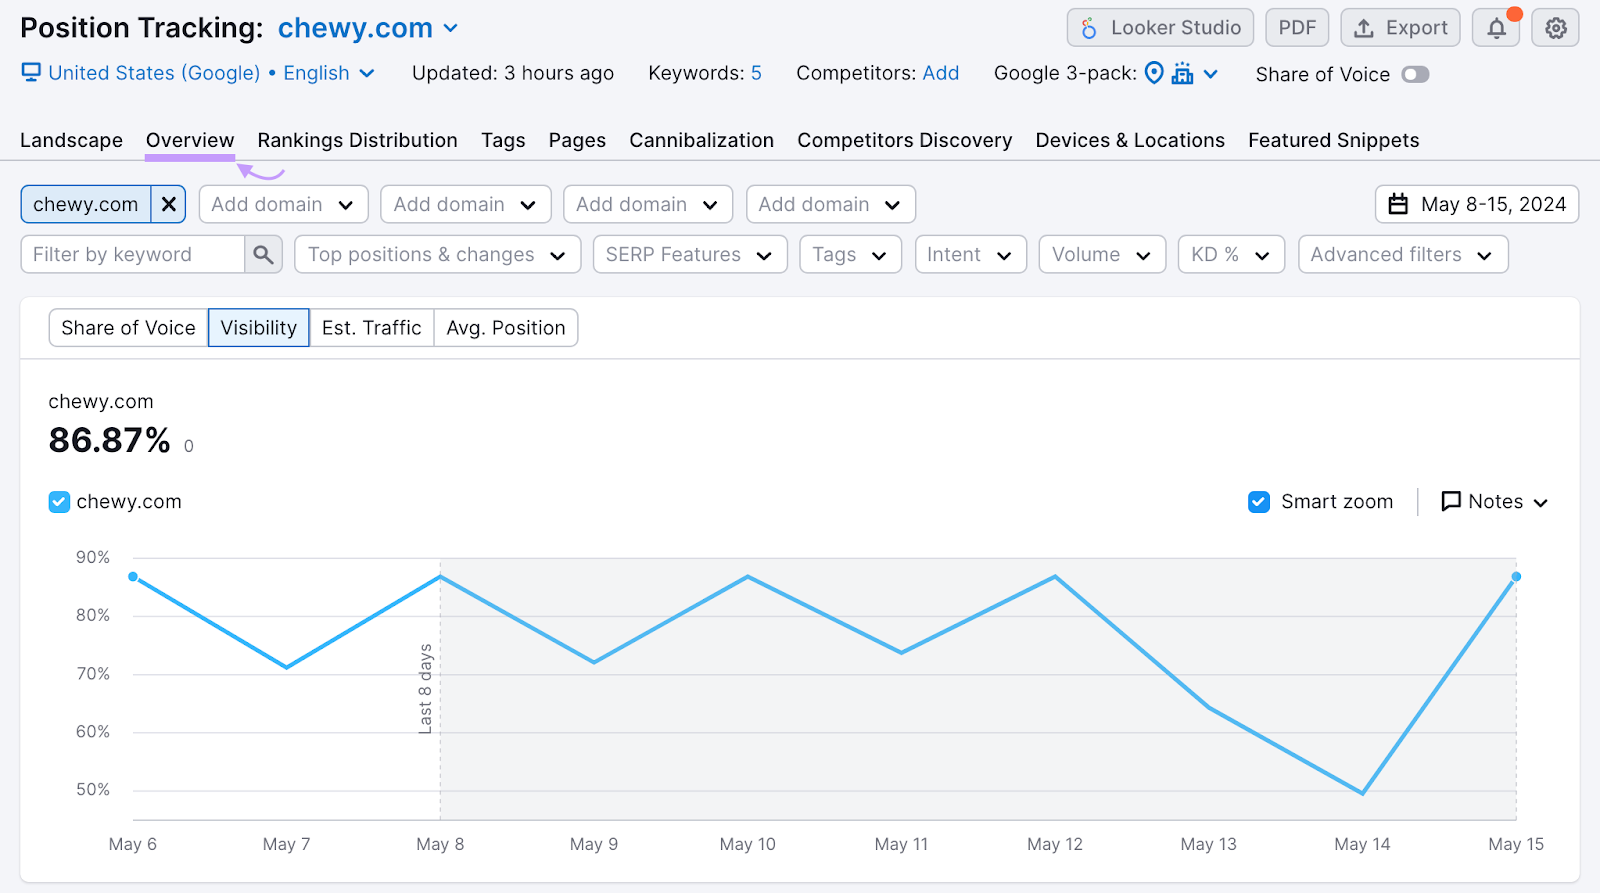 Semrush position tracking overview screen for the website chewy.com